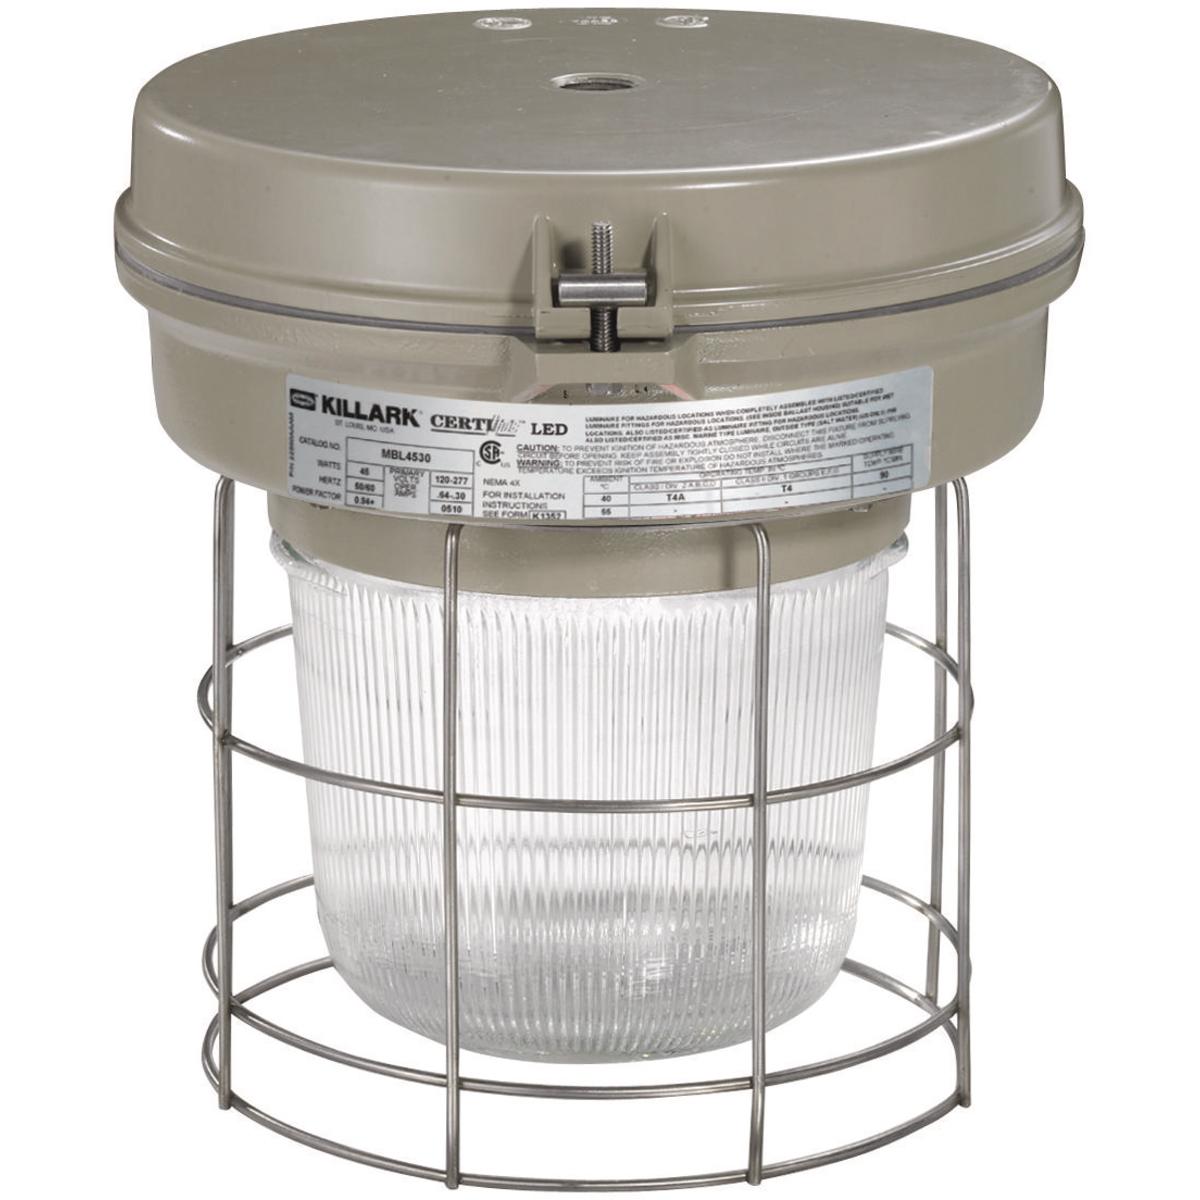 Hubbell VM3H105A2R1G VM3 Series - 100W Metal Halide 480V - 3/4" Pendant - Type I Glass Refractor and Guard  ; Ballast tank and splice box – corrosion resistant copper-free aluminum alloy with baked powder epoxy/polyester finish, electrostatically applied for complete, uniform